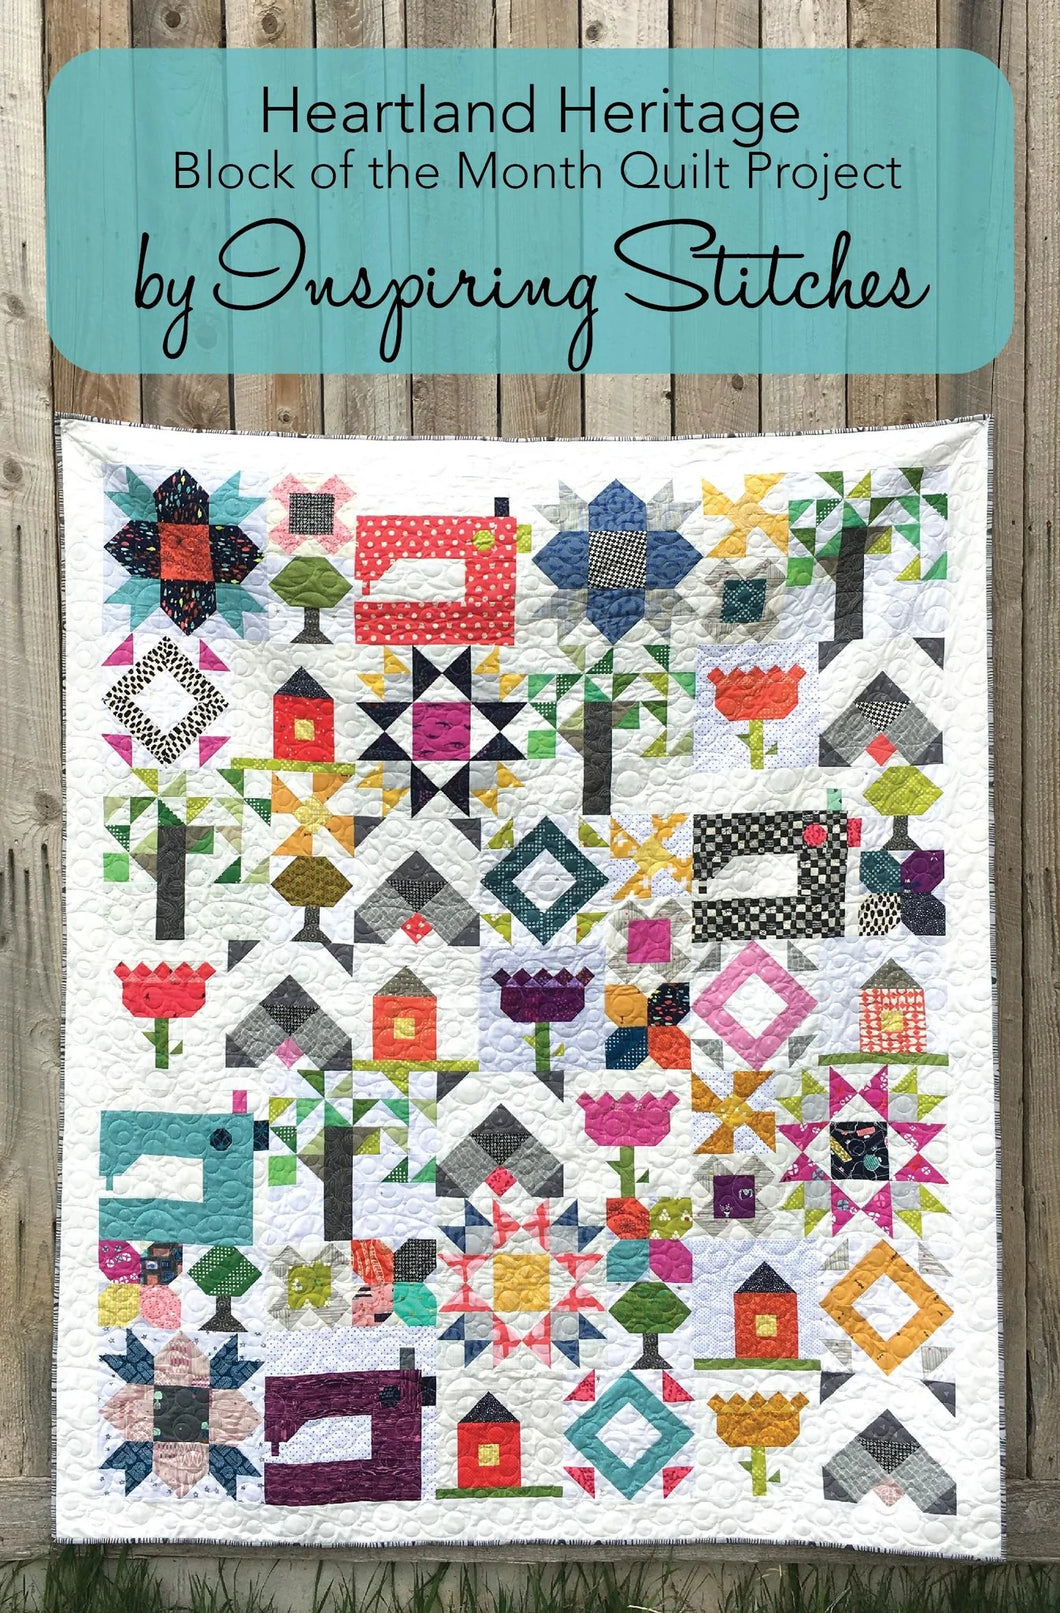 Heartland Heritage - Block of the Month Quilt Project by Inspiring Stitches